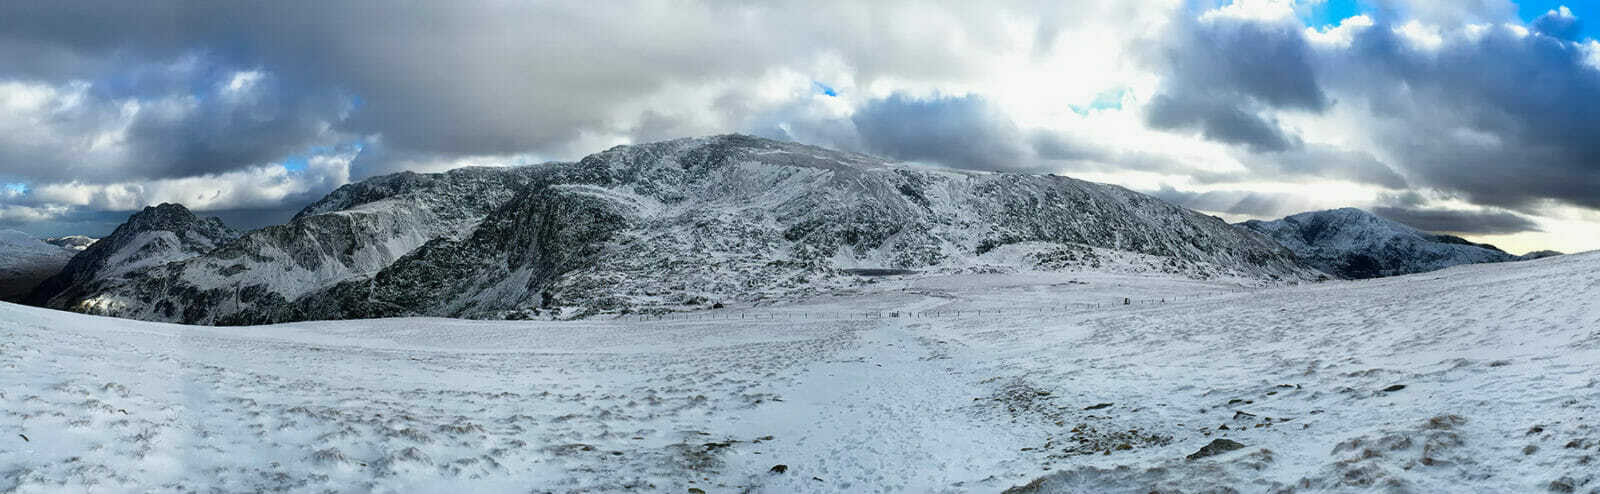 Landscape Photograph of the stunning snow covered mountain Glyder Fach